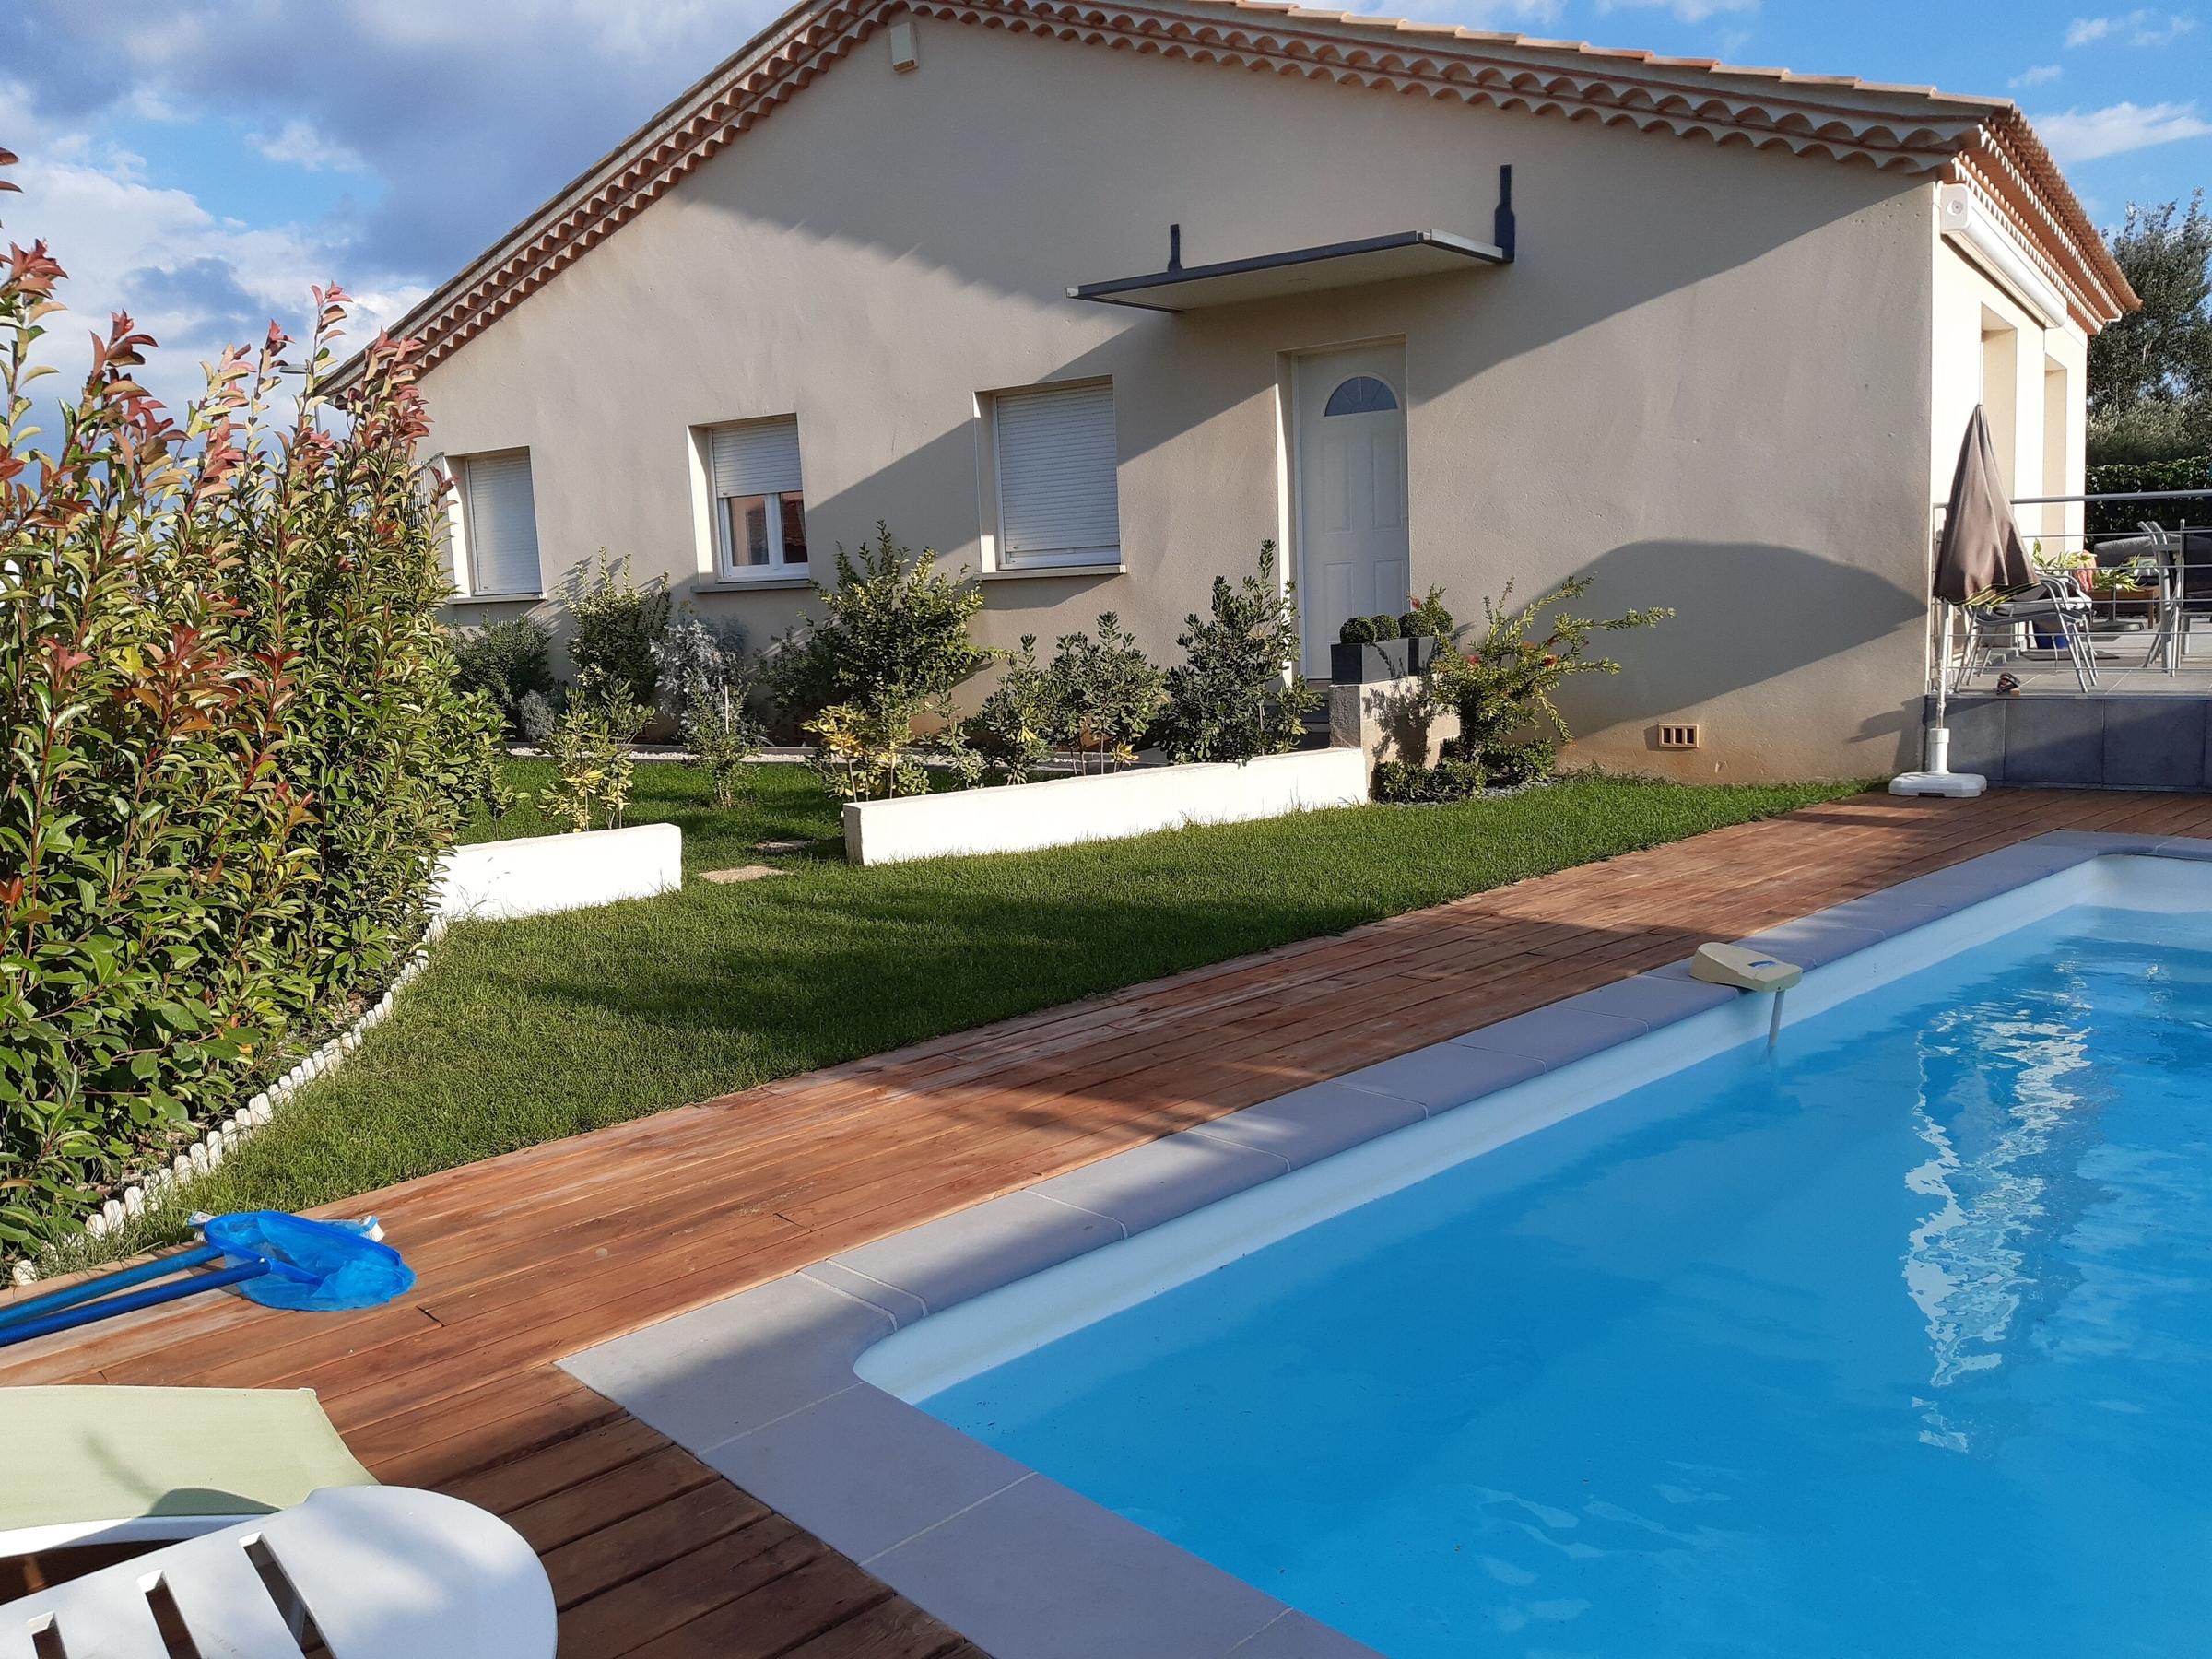 Pet Friendly Villa Ideally Located with Swimming Pool